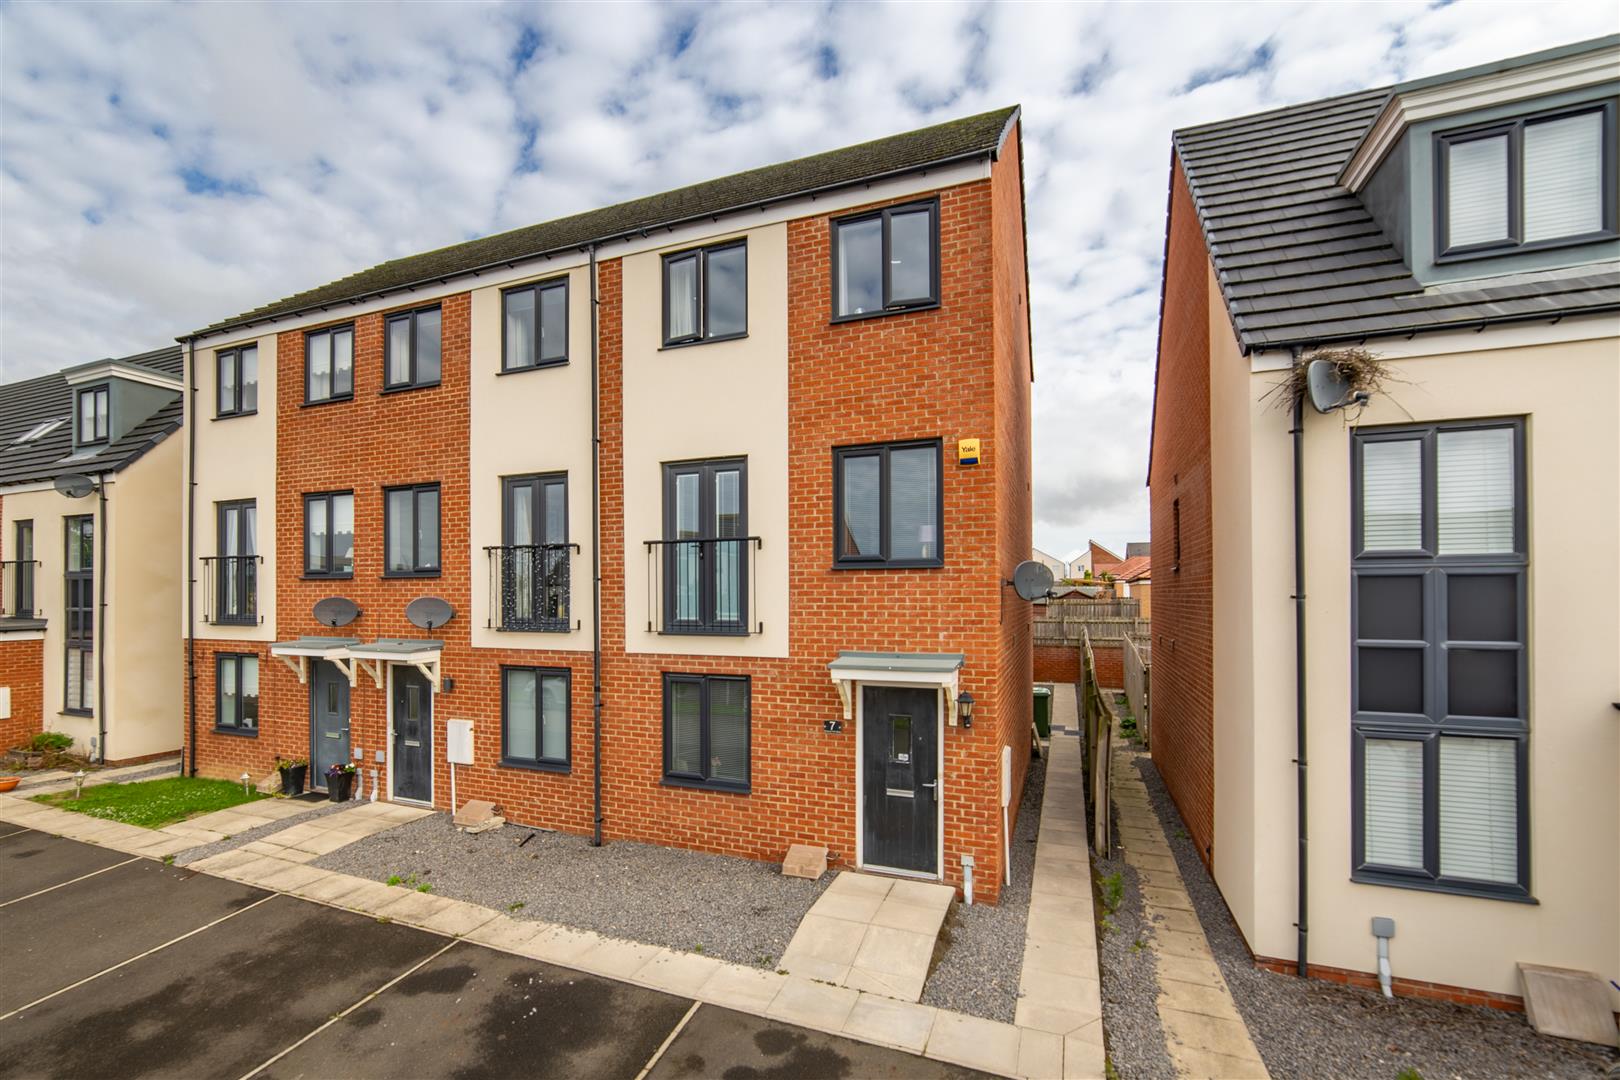 3 bed end of terrace house for sale in Elmwood Park Mews, Great Park, NE13